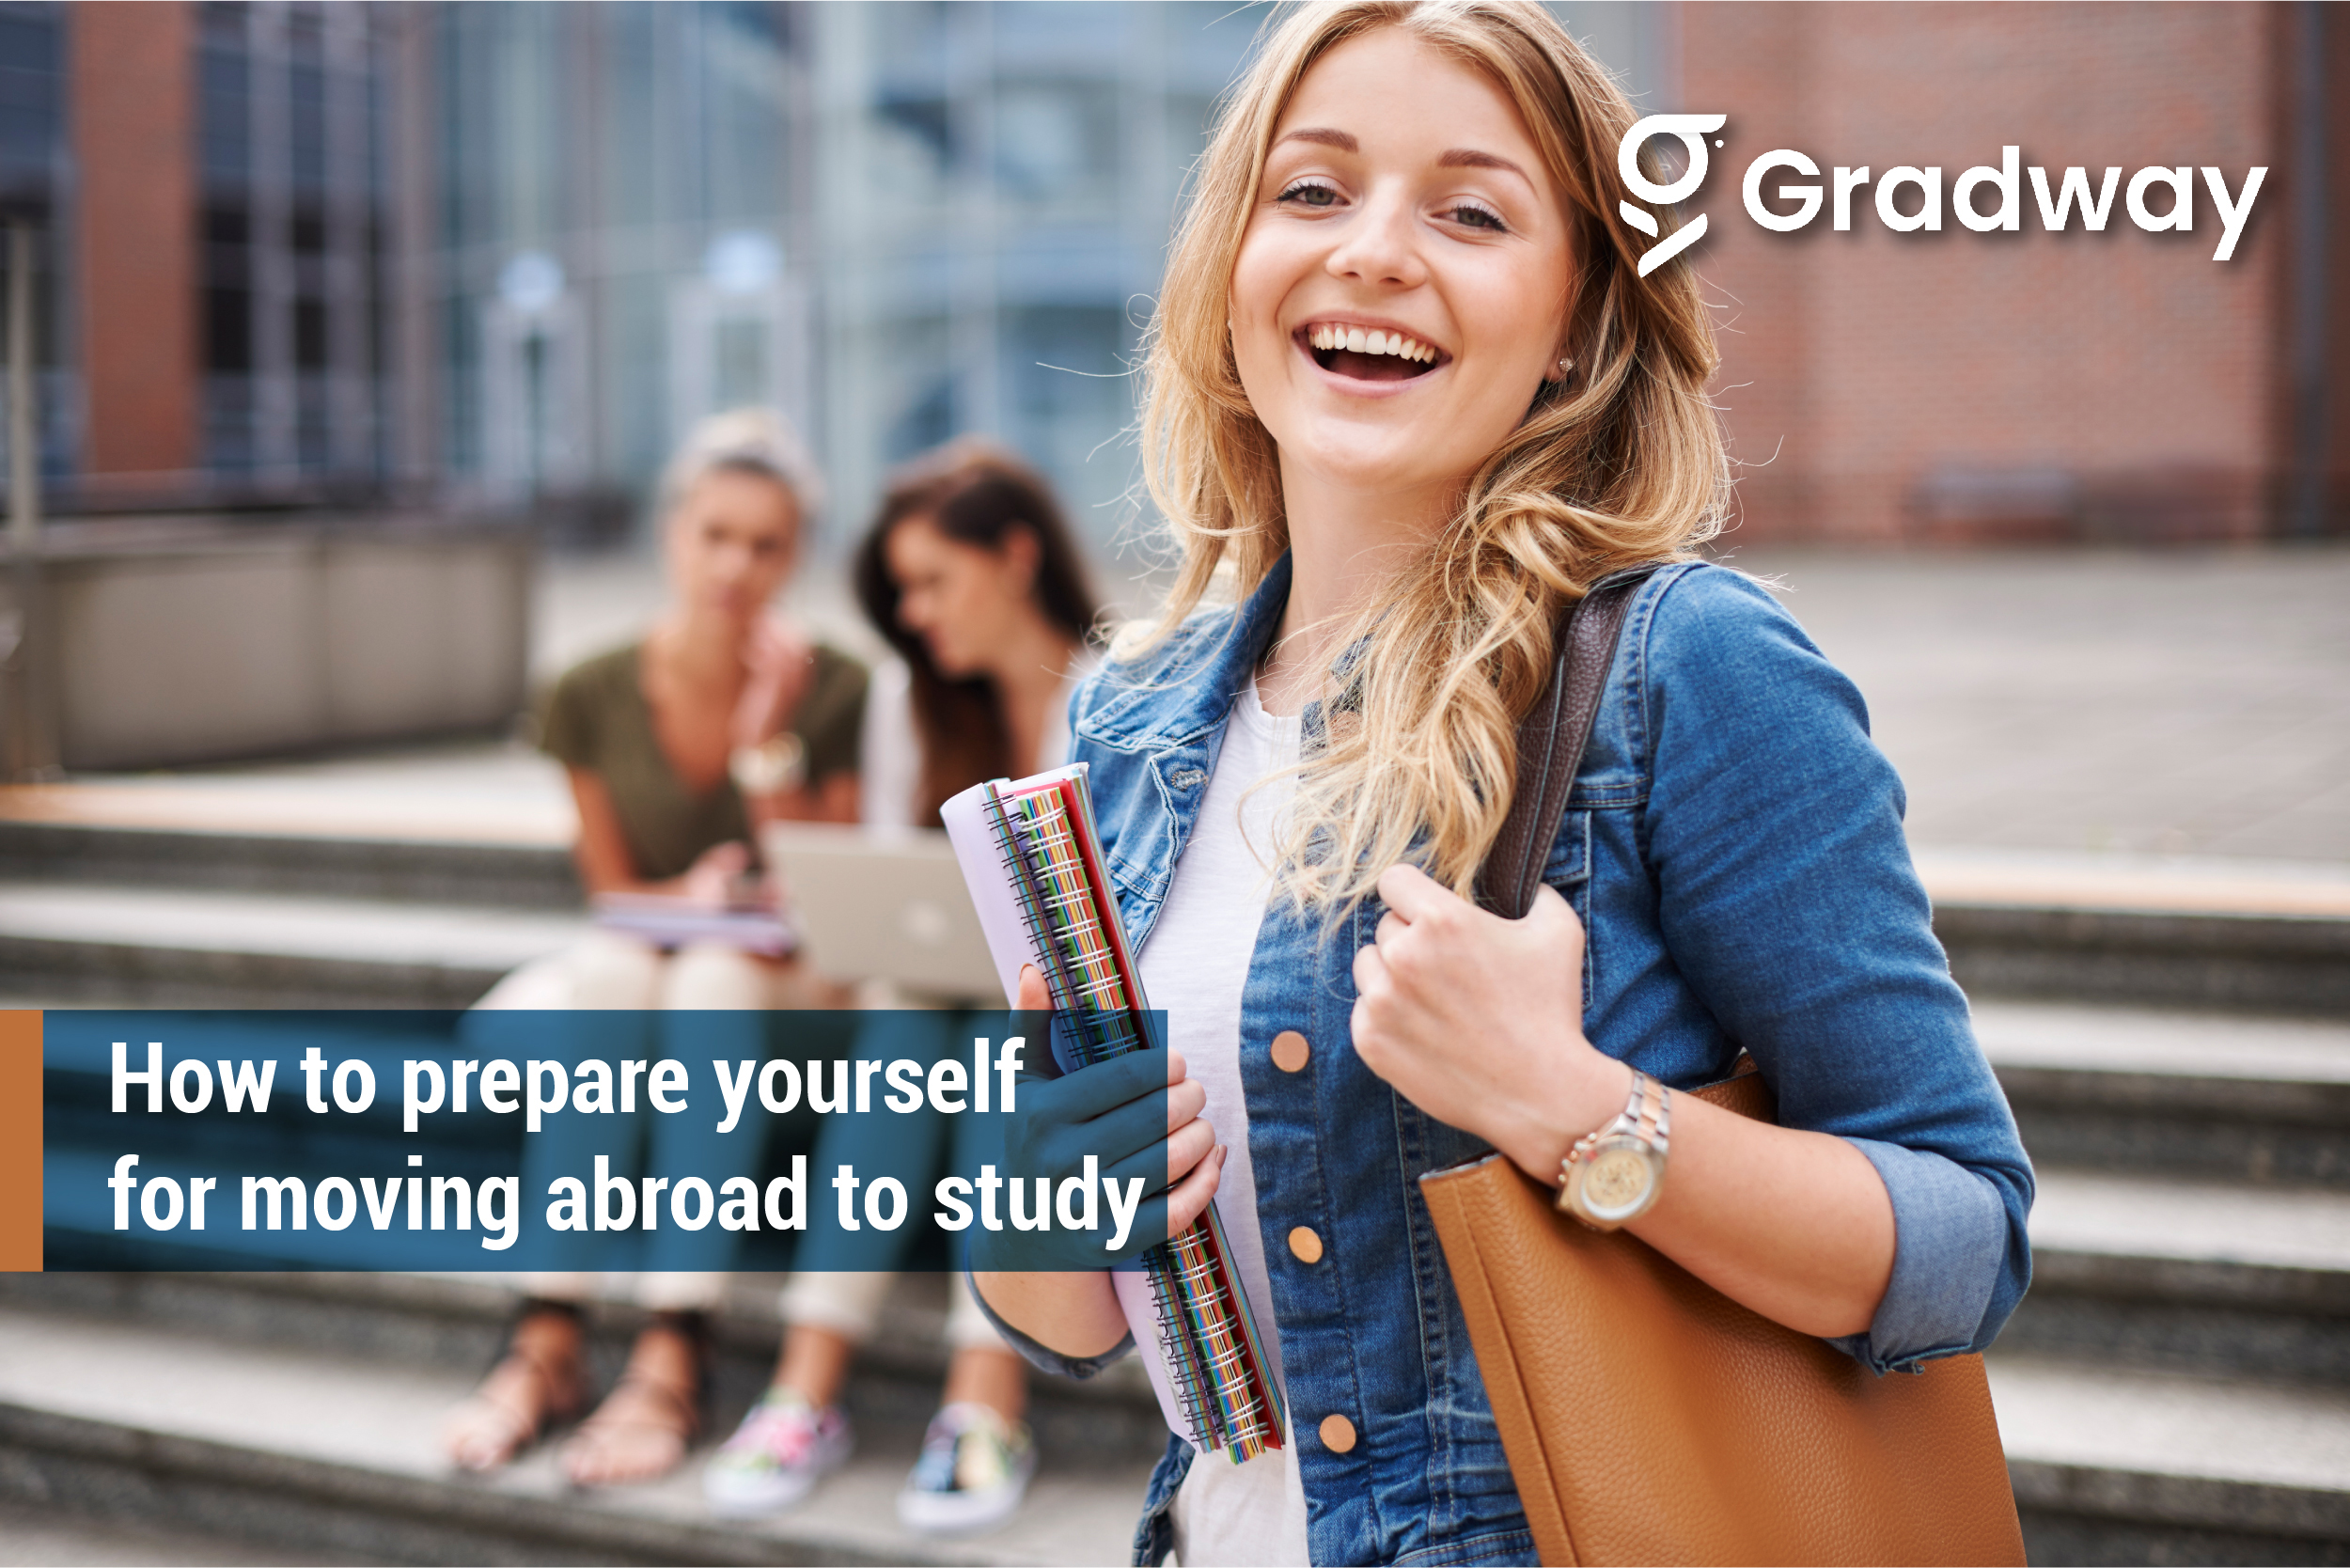 How To Prepare Yourself for Moving Abroad to Study | Gradway